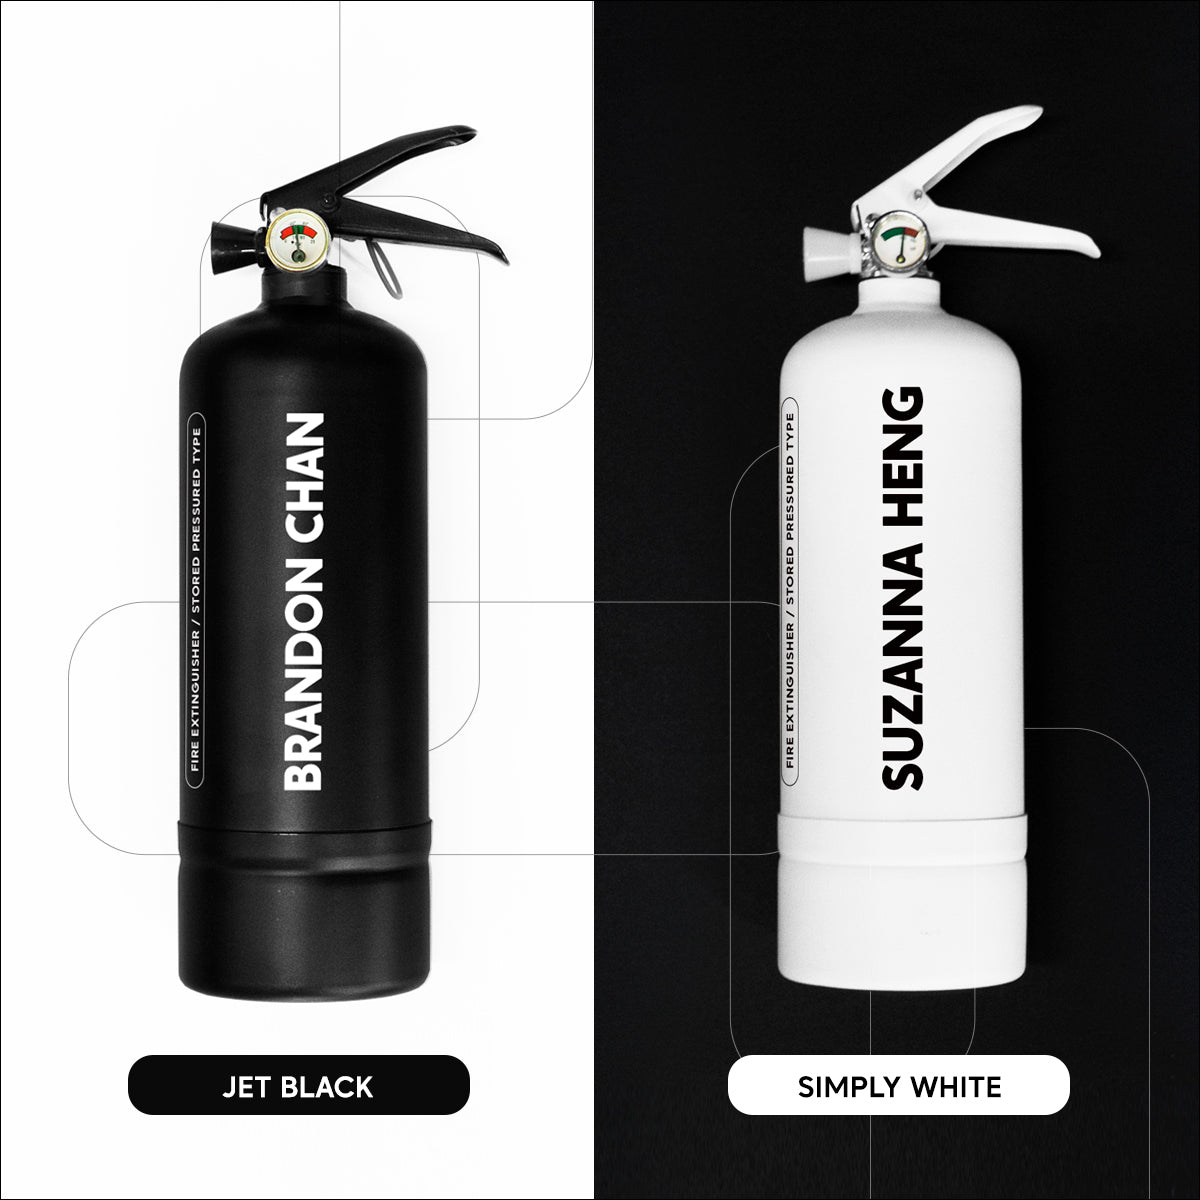 Customized Fire Extinguisher in Jet Black or Simply White